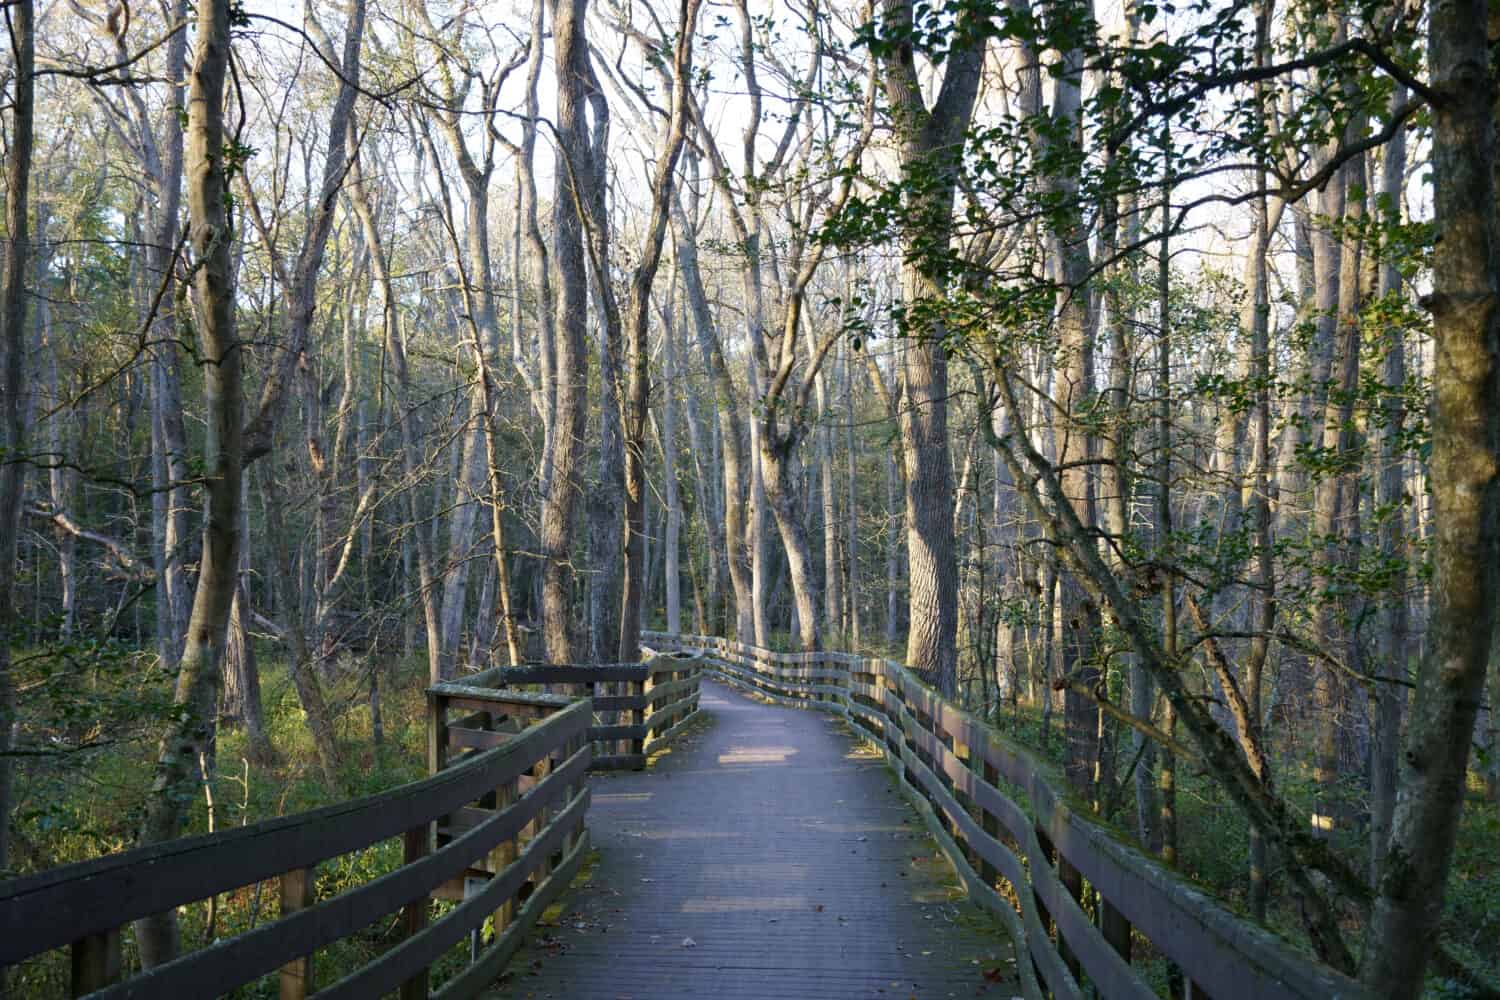 Sun shining through the trees on the boardwalk in trap pond state park